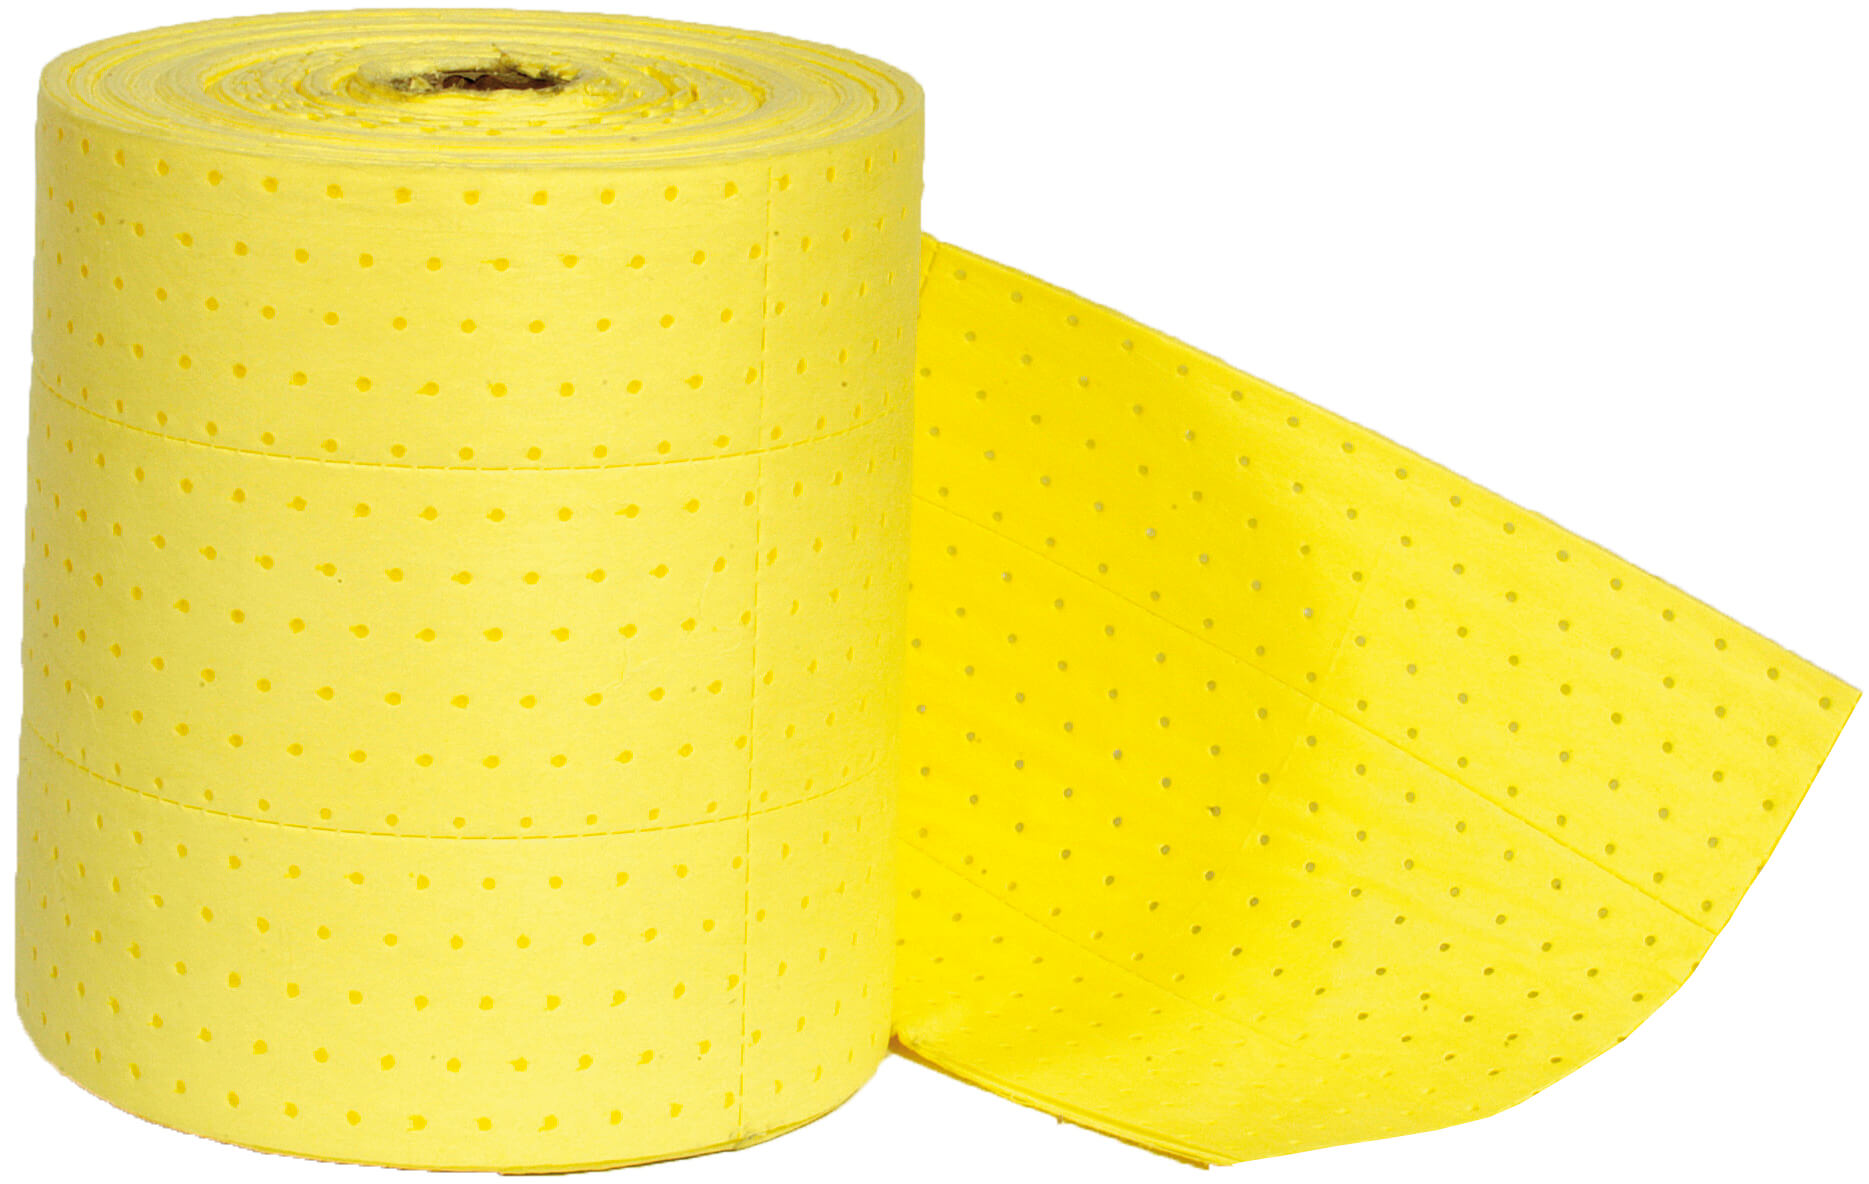 Premium Weight Chemical Absorbent Roll 38cm x 40M, Boxed 